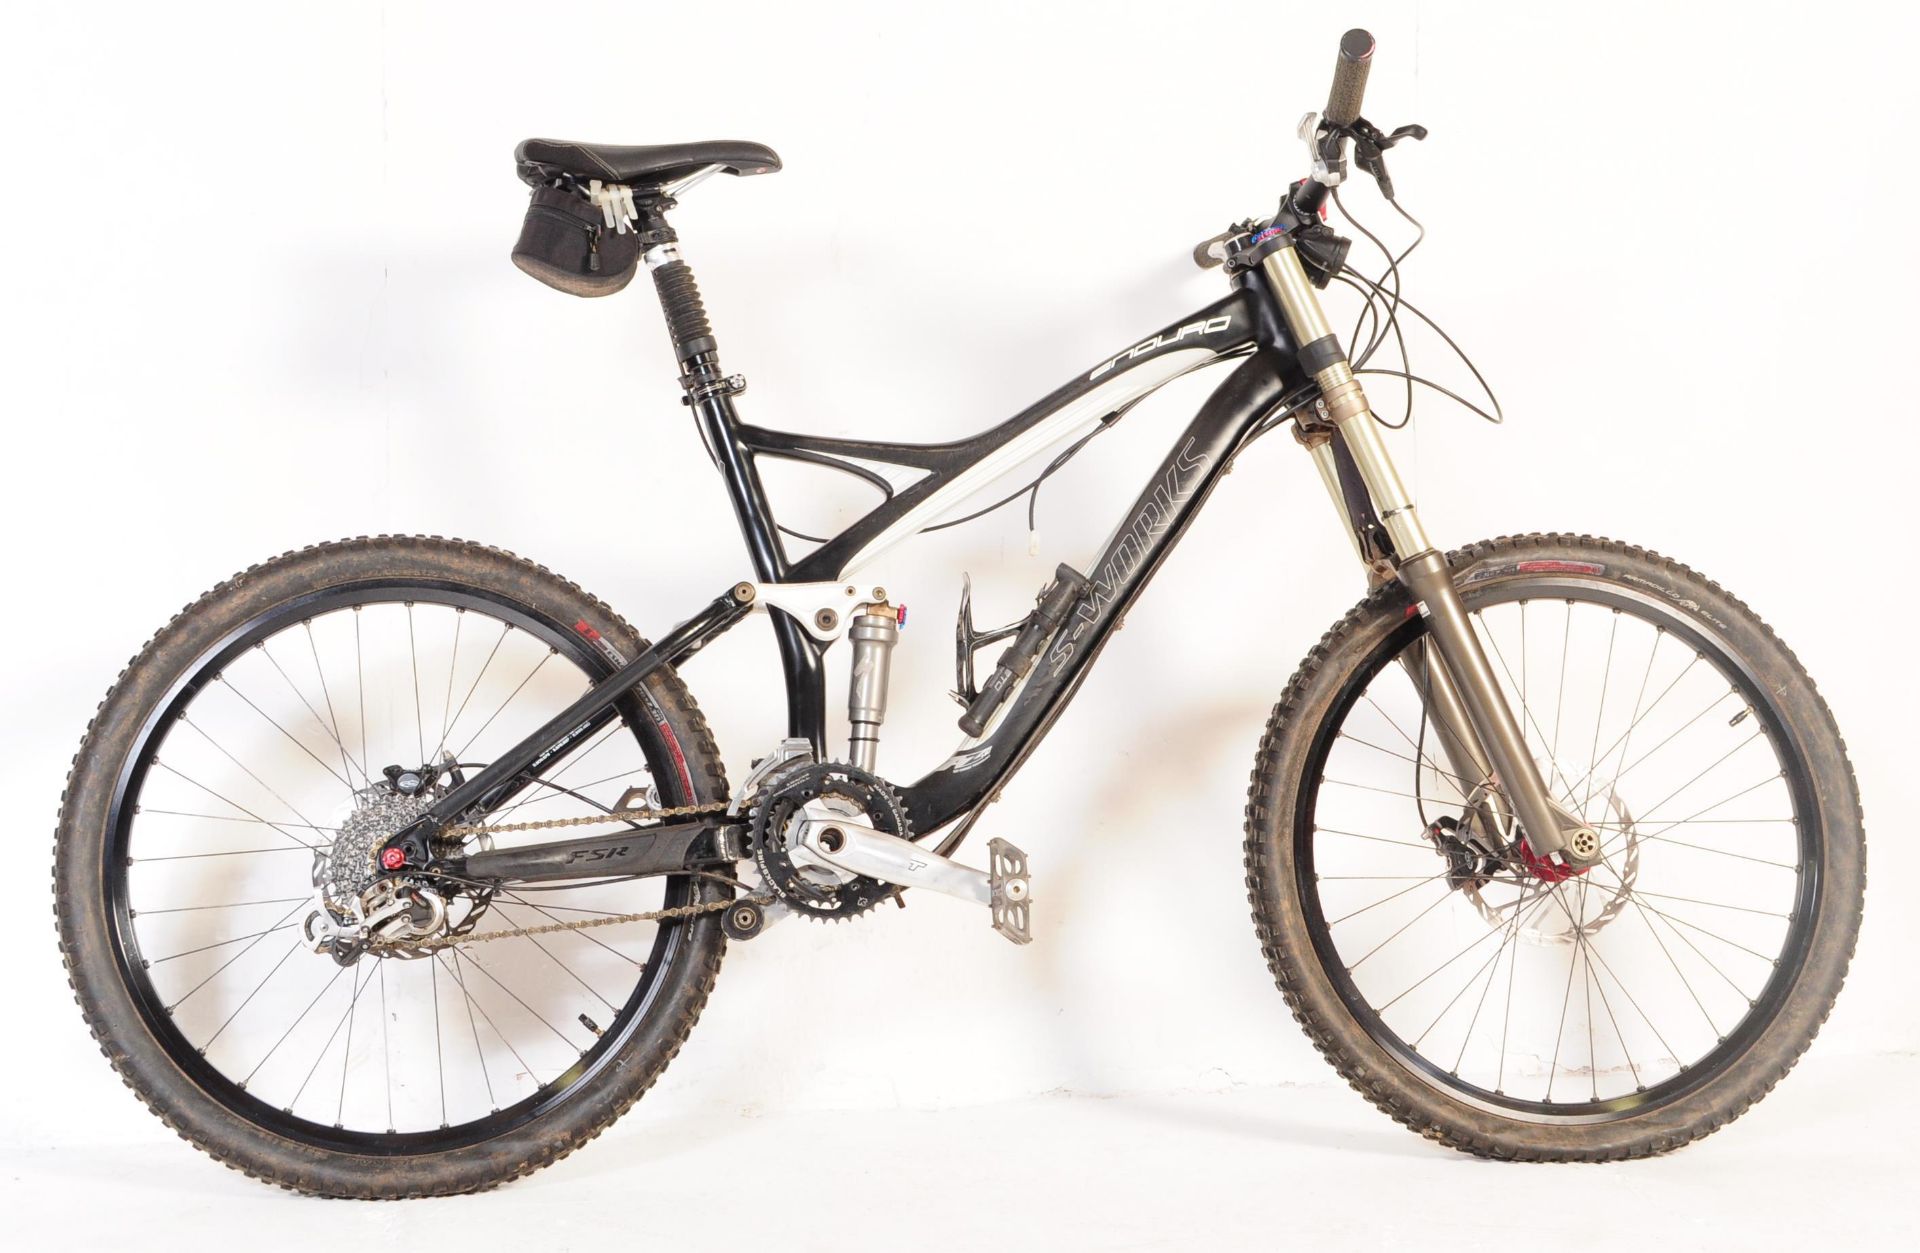 CONTEMPORARY CARBON FIBRE MOUNTAIN BIKE BY S-WORKS